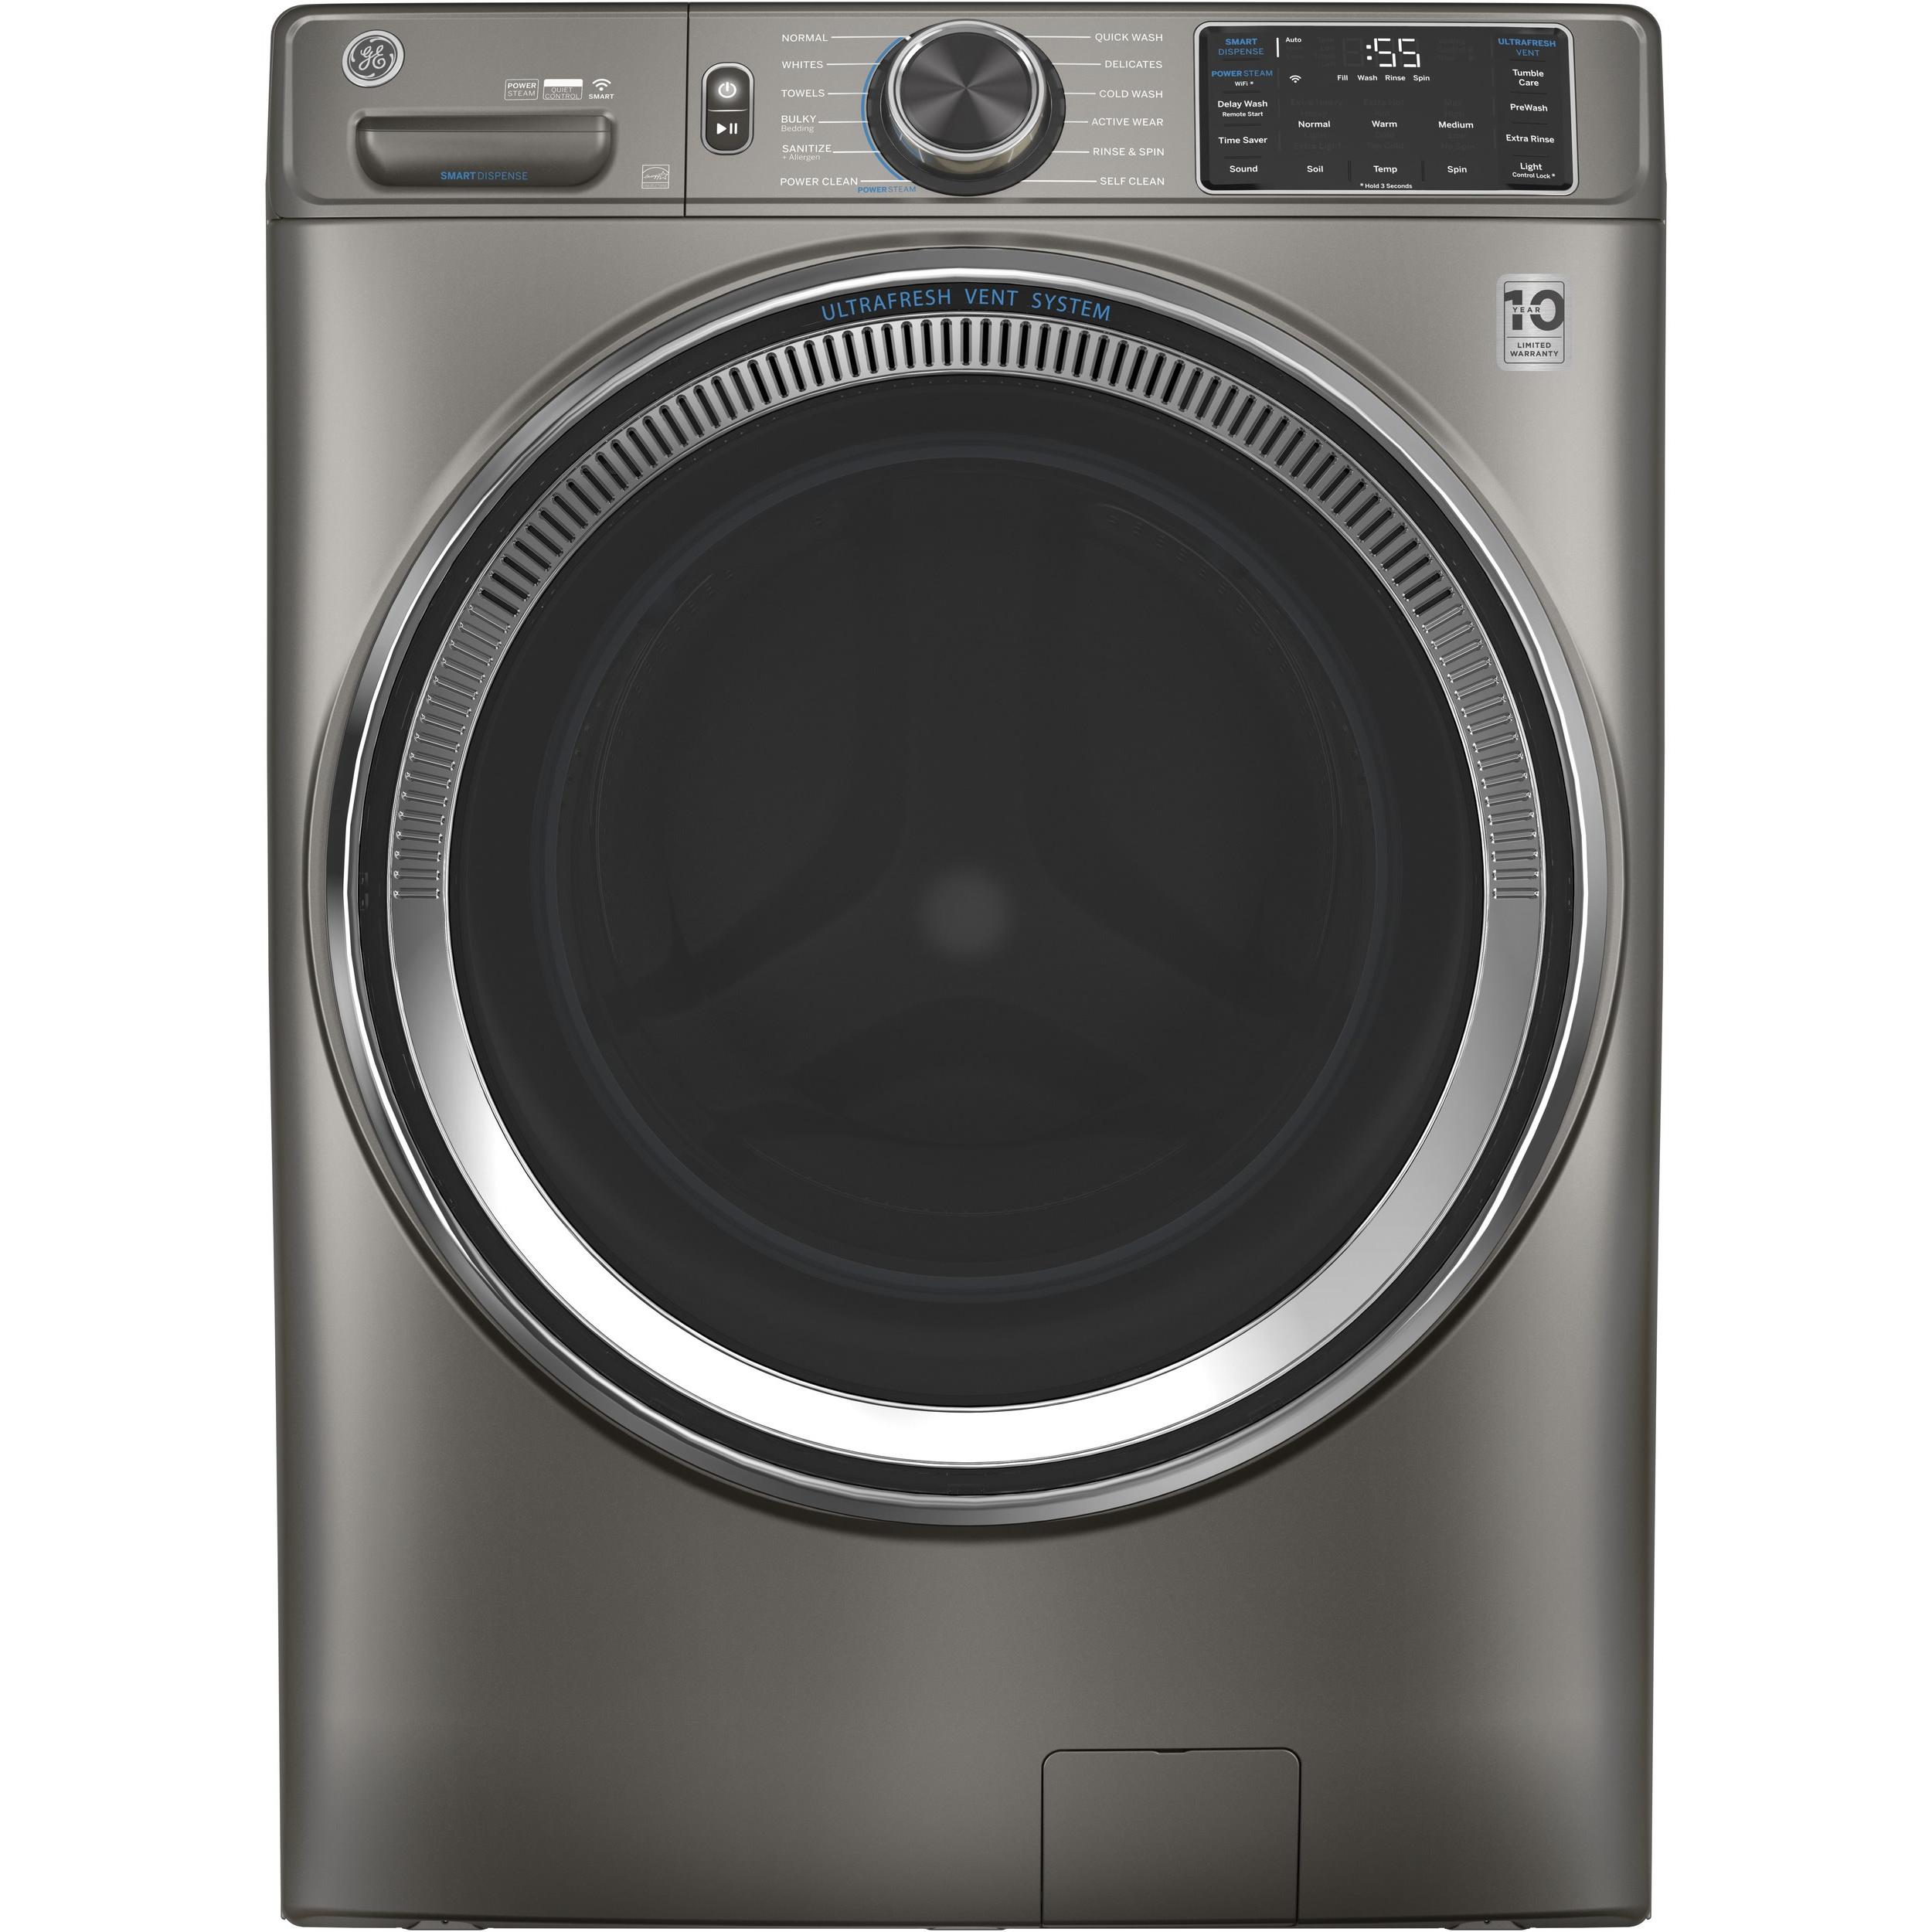 GE 4.8 cu. ft. Front Loading Washer with SmartDispense? GFW650SPNSN